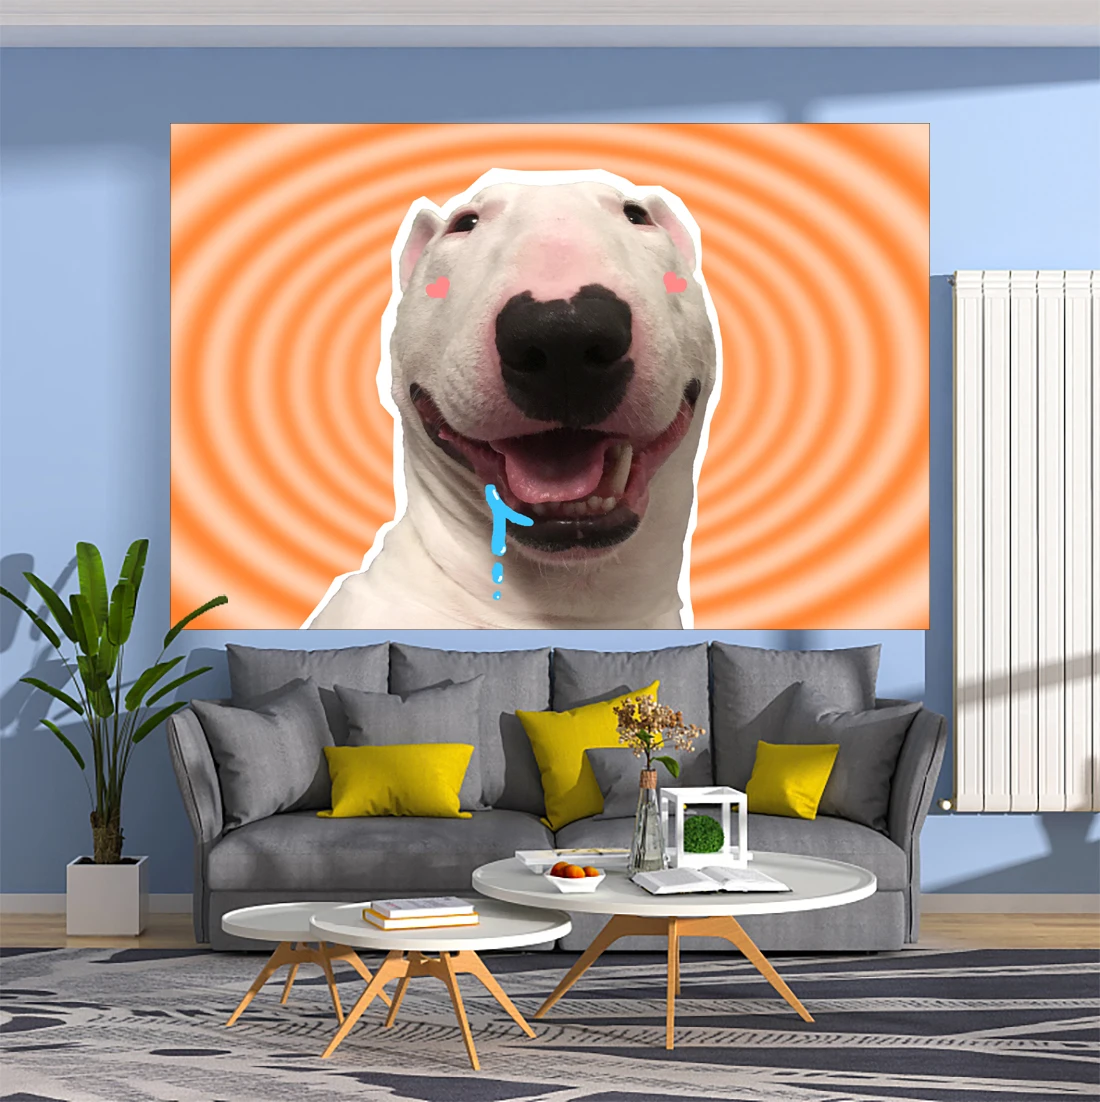 

XxDeco Cute Dog Tapestry Funny Bull Terrier Meme Printed Wall Hanging Art Aesthetics Carpets Bedroom Or Home For Decoration